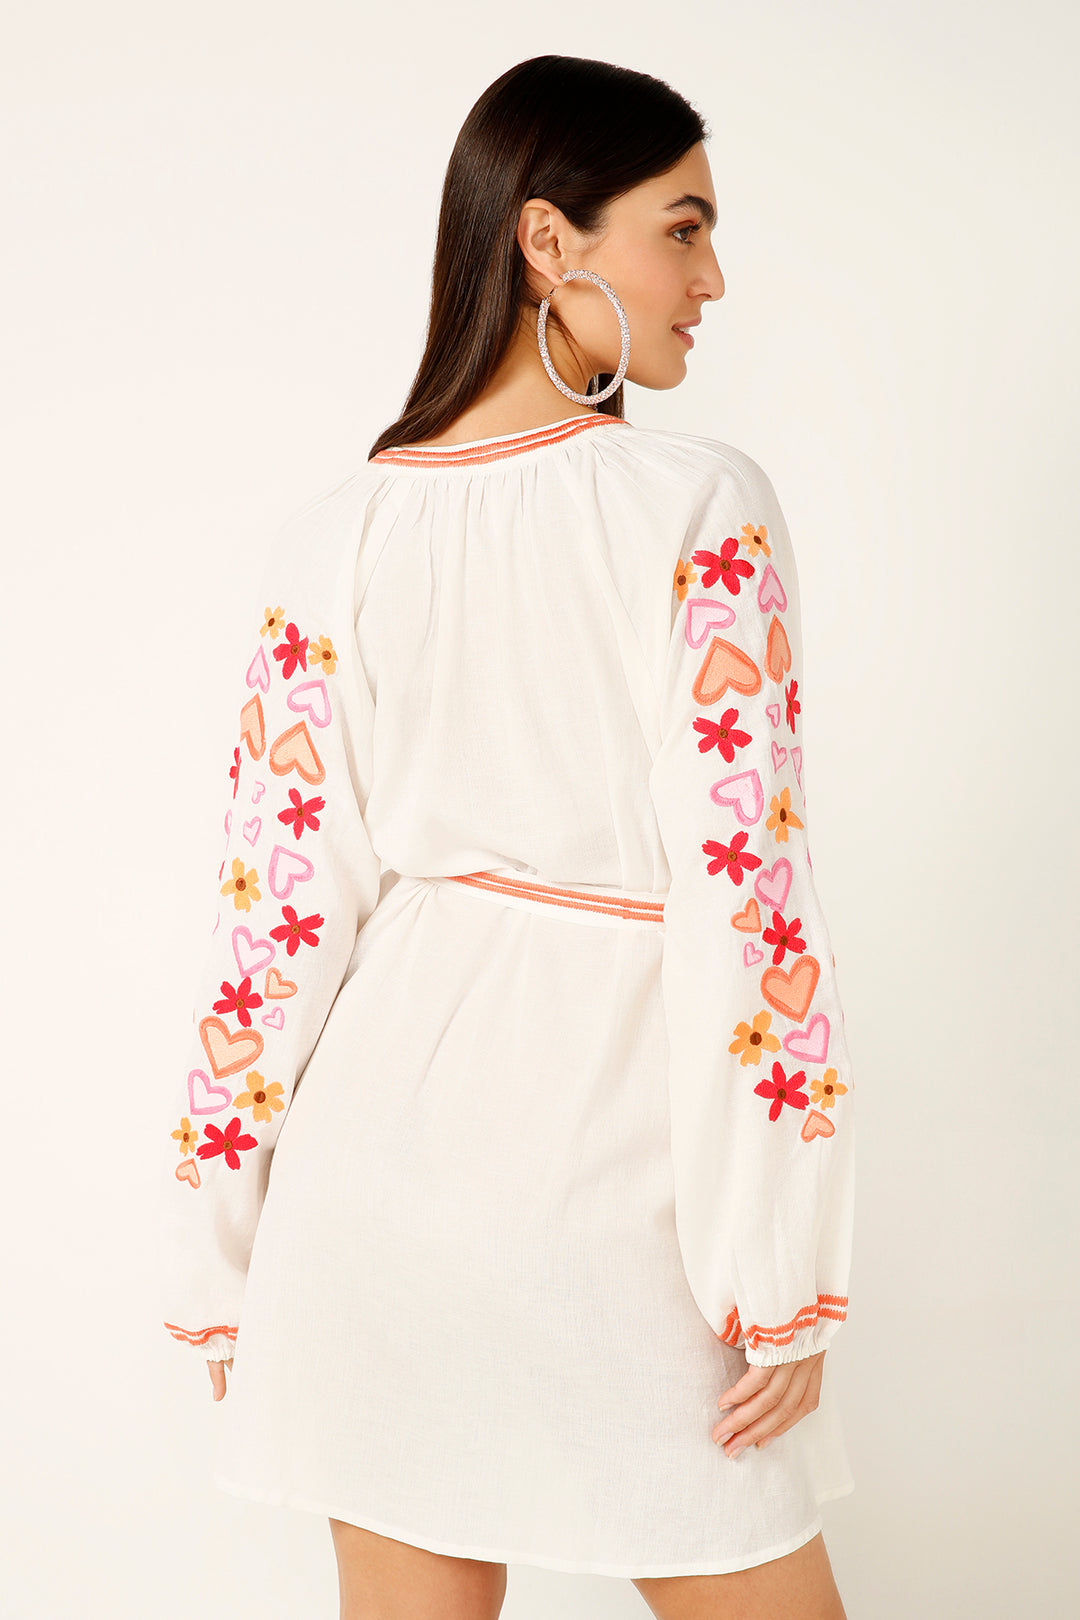 Wish You Joy & Happiness Embroidered Dress